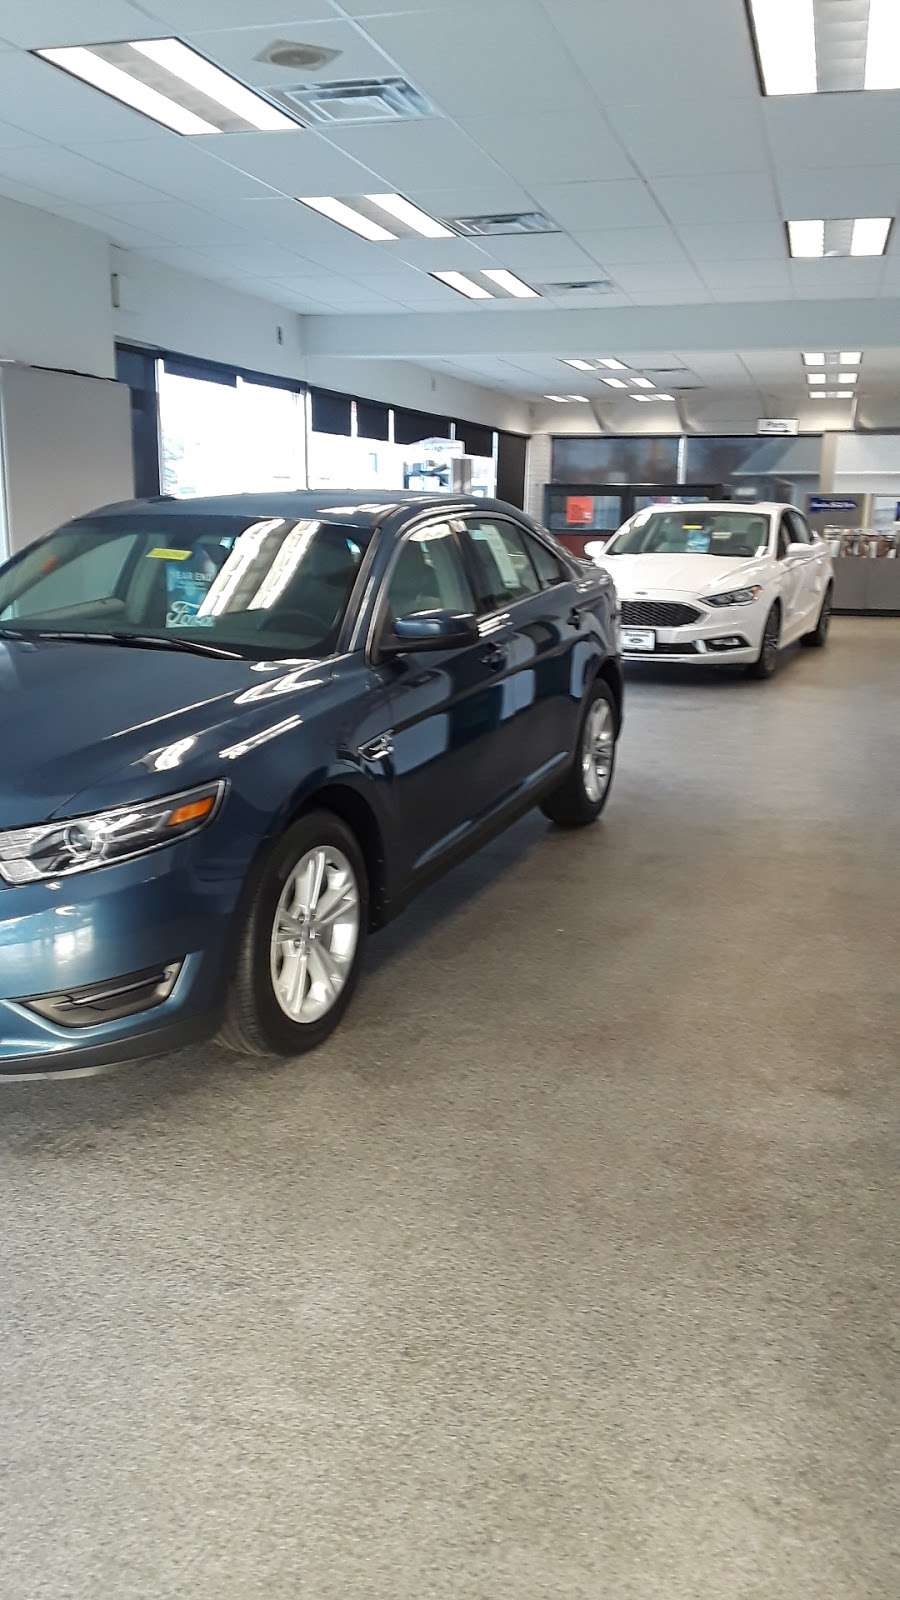 Bayshore Ford | 200 S Broadway, Pennsville, NJ 08070 | Phone: (856) 678-3111